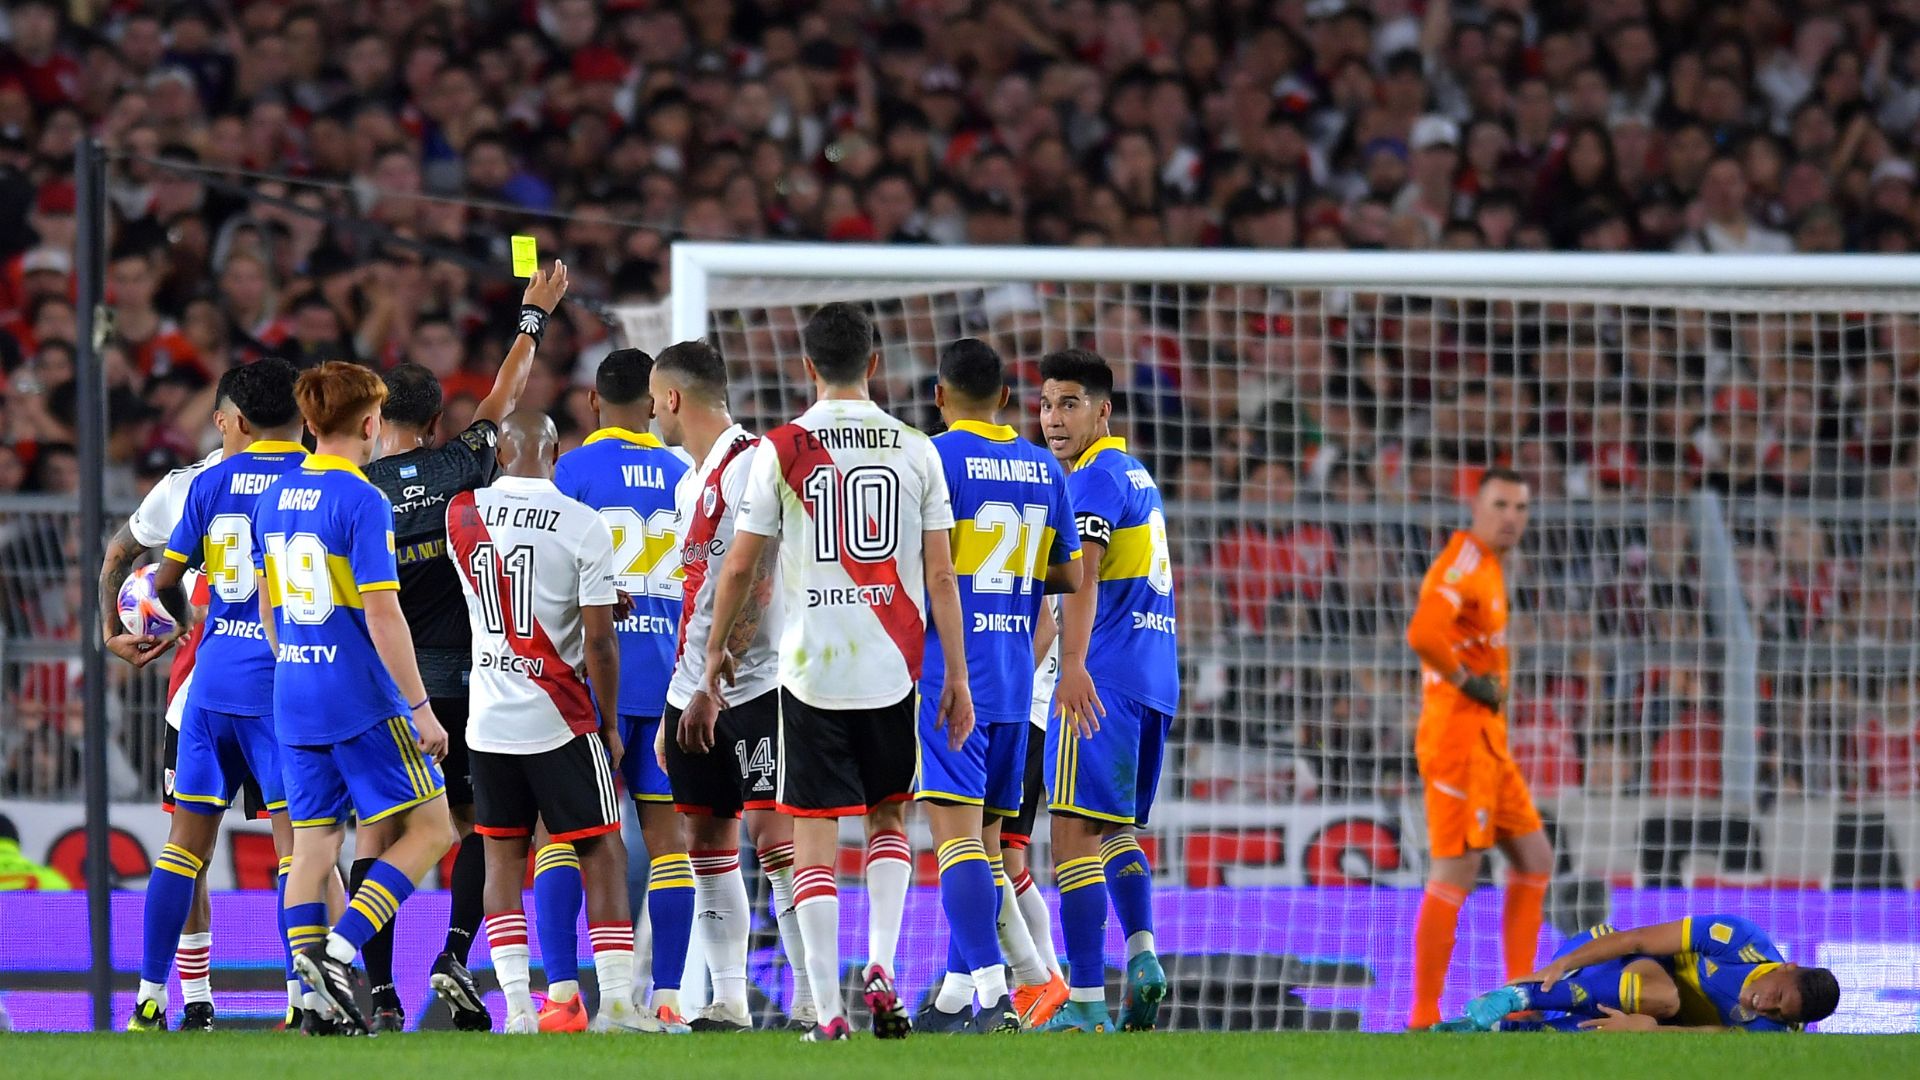 A general fight broke out on the pitch after Borja's goal for River Plate (Credit: Getty Images)